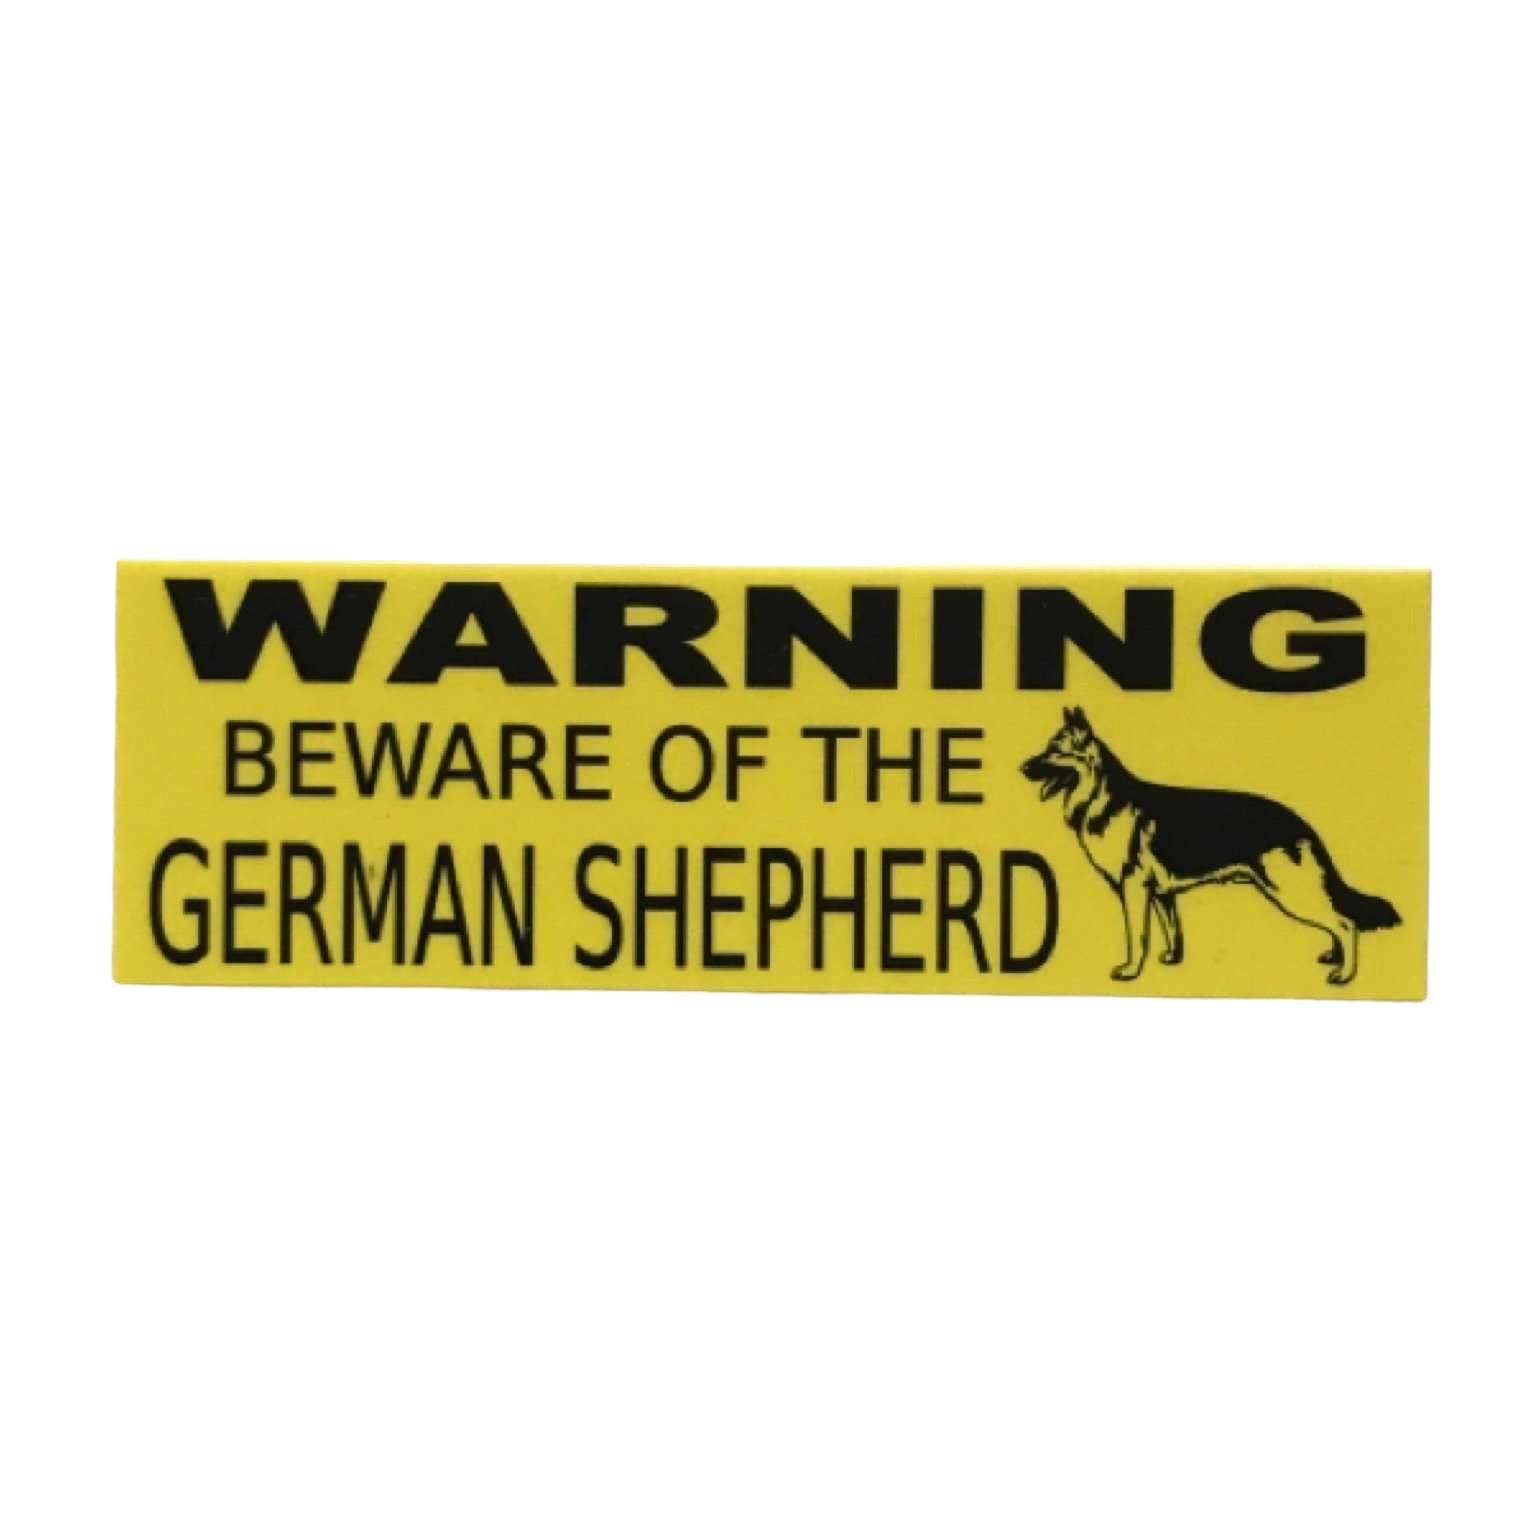 Warning Beware Of The German Shepherd Dog Sign - The Renmy Store Homewares & Gifts 